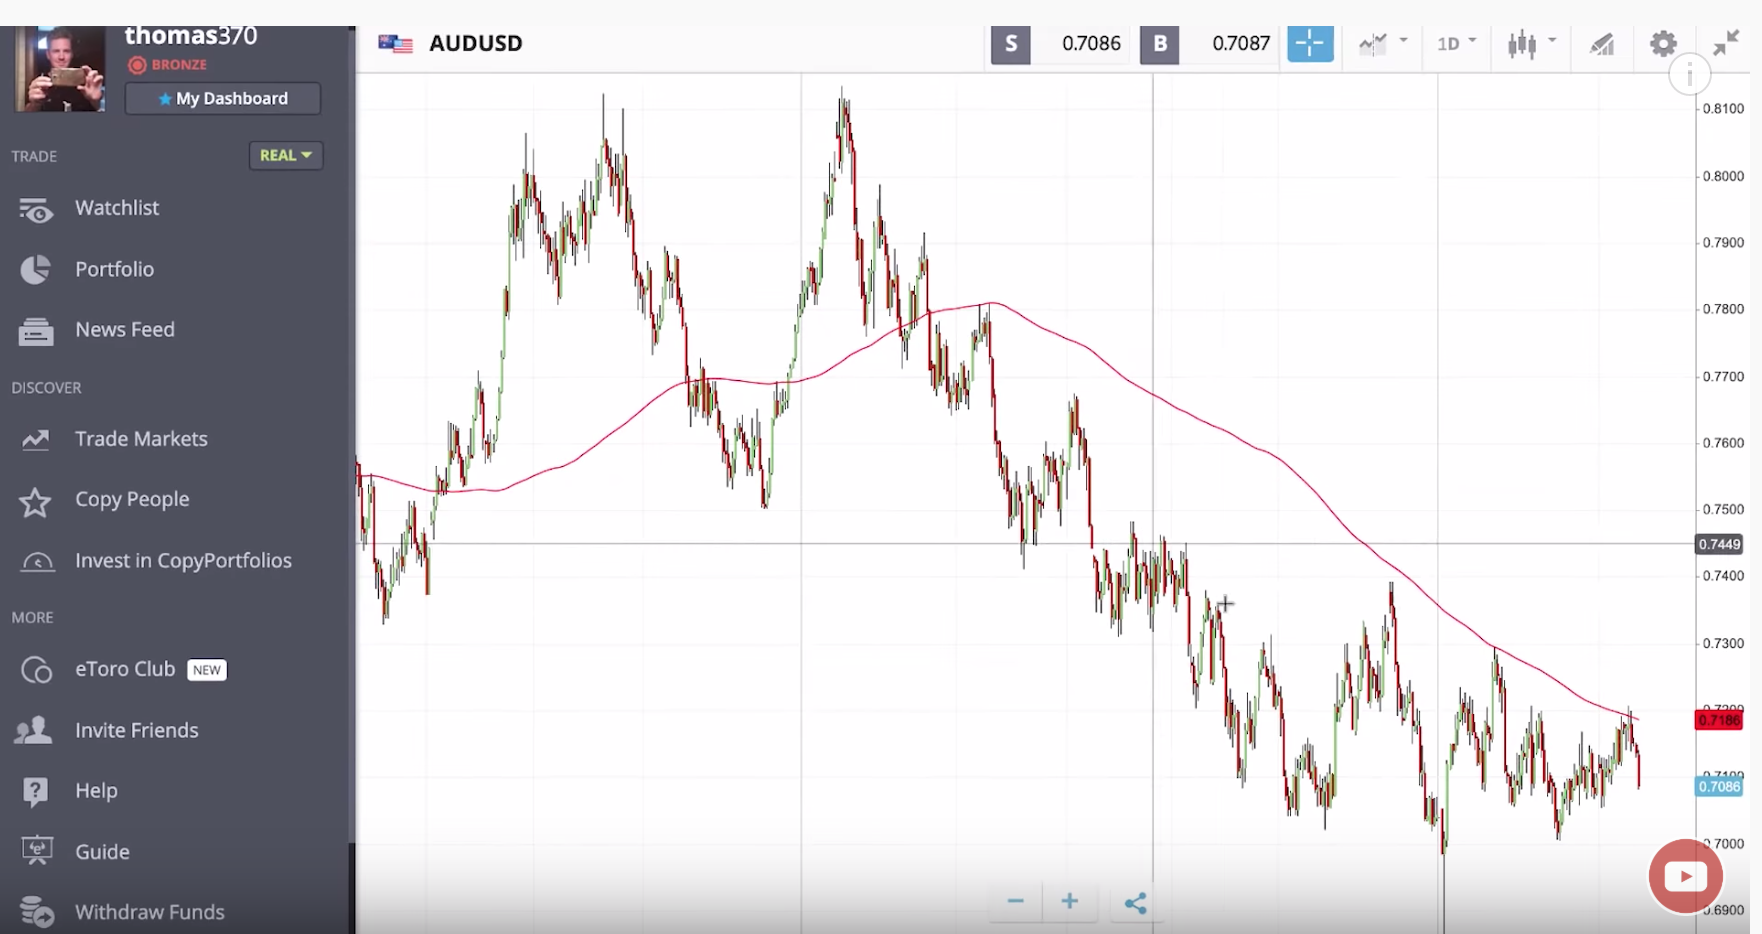 Trading Chart showing AUD Falling against USD in Candlesticks - April 2019